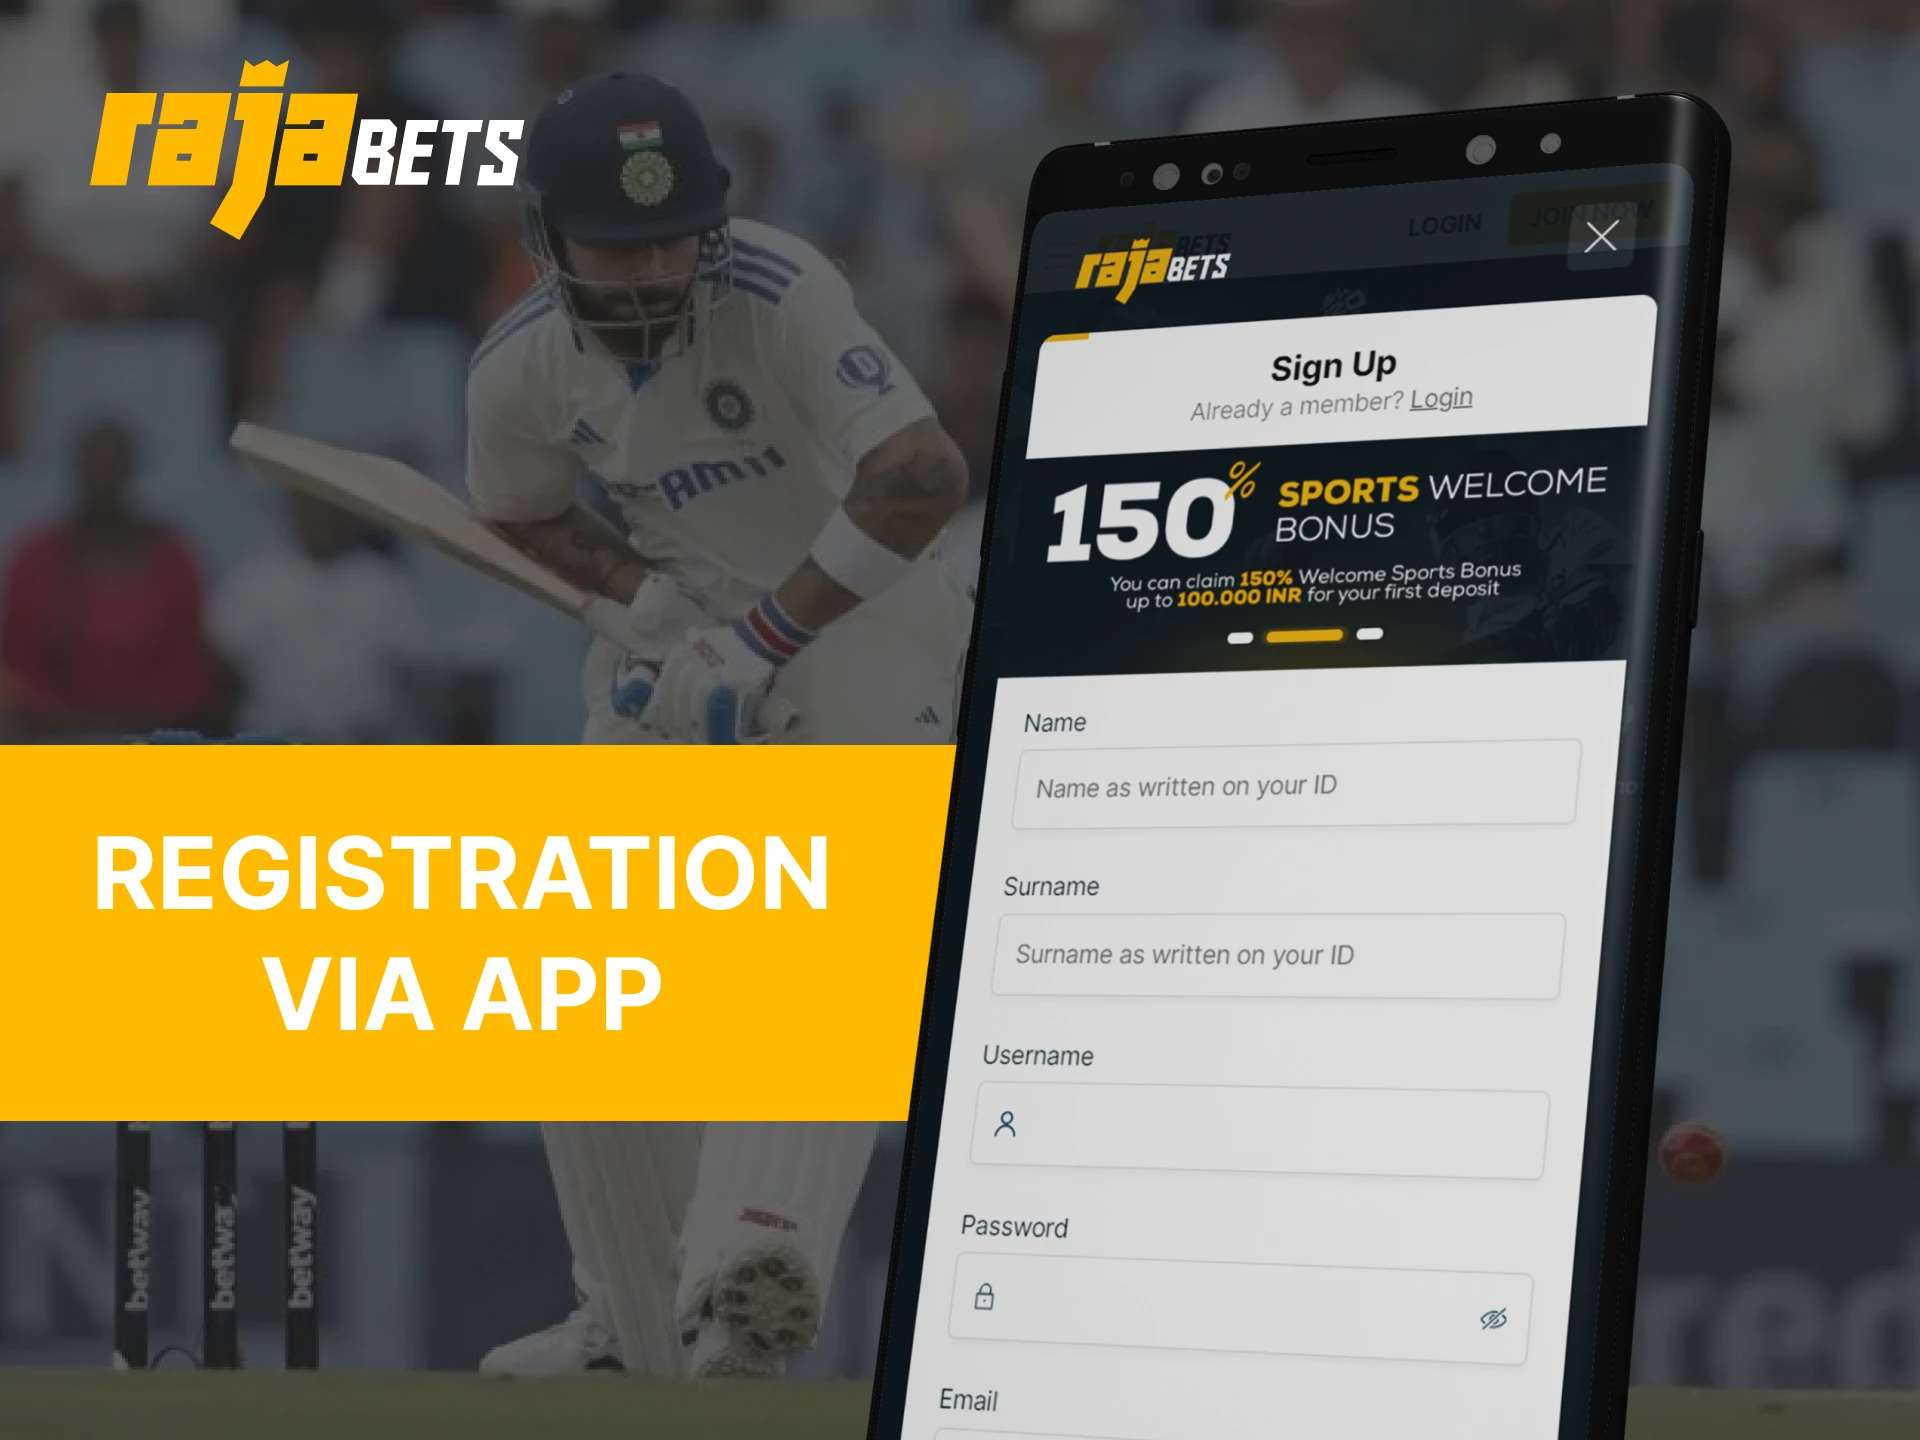 Download the Rajabets mobile app and register directly within the app.